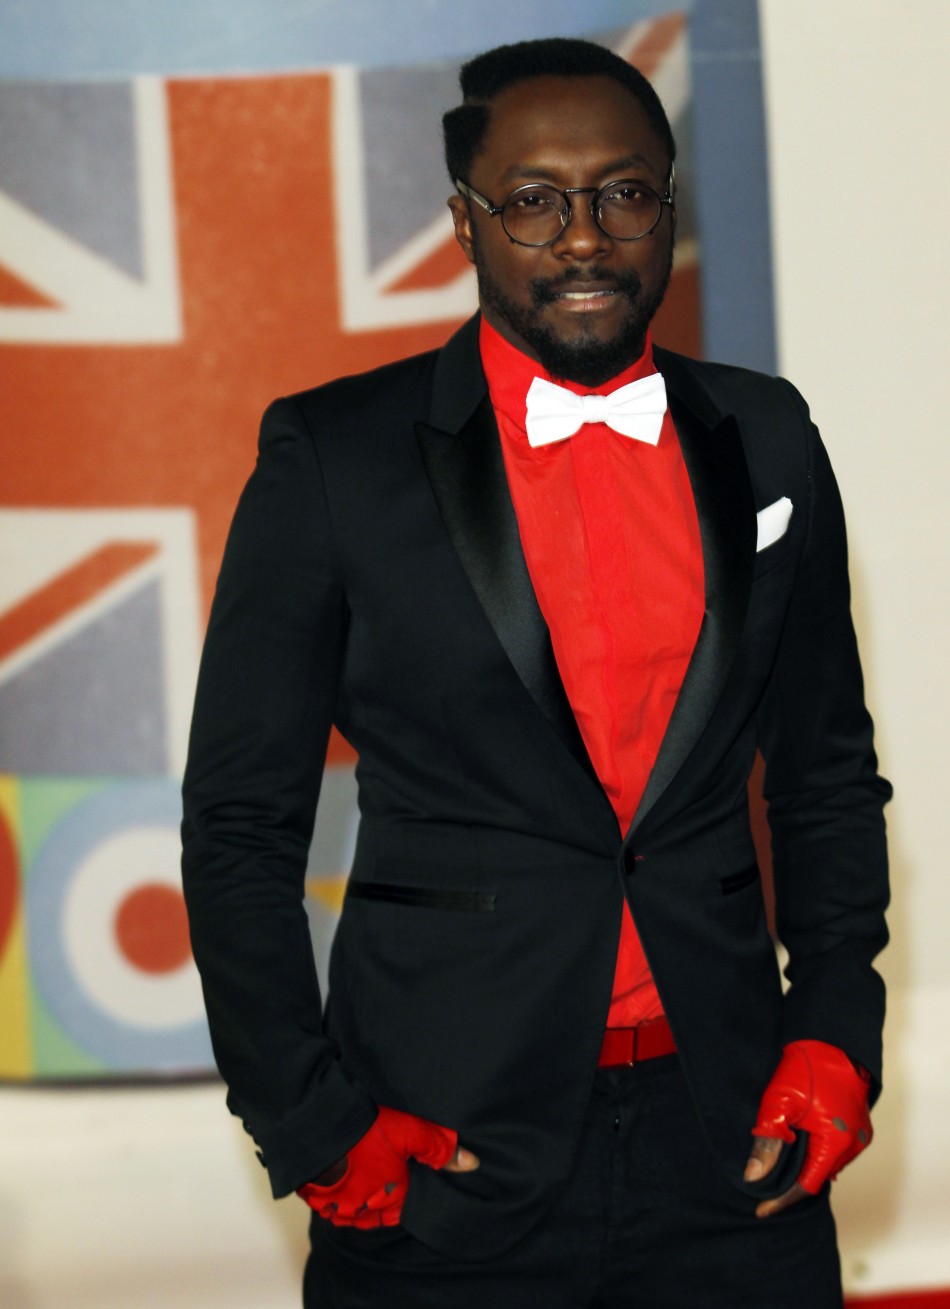 Will.i.am arrives for the BRIT Music Awards at the O2 Arena in London